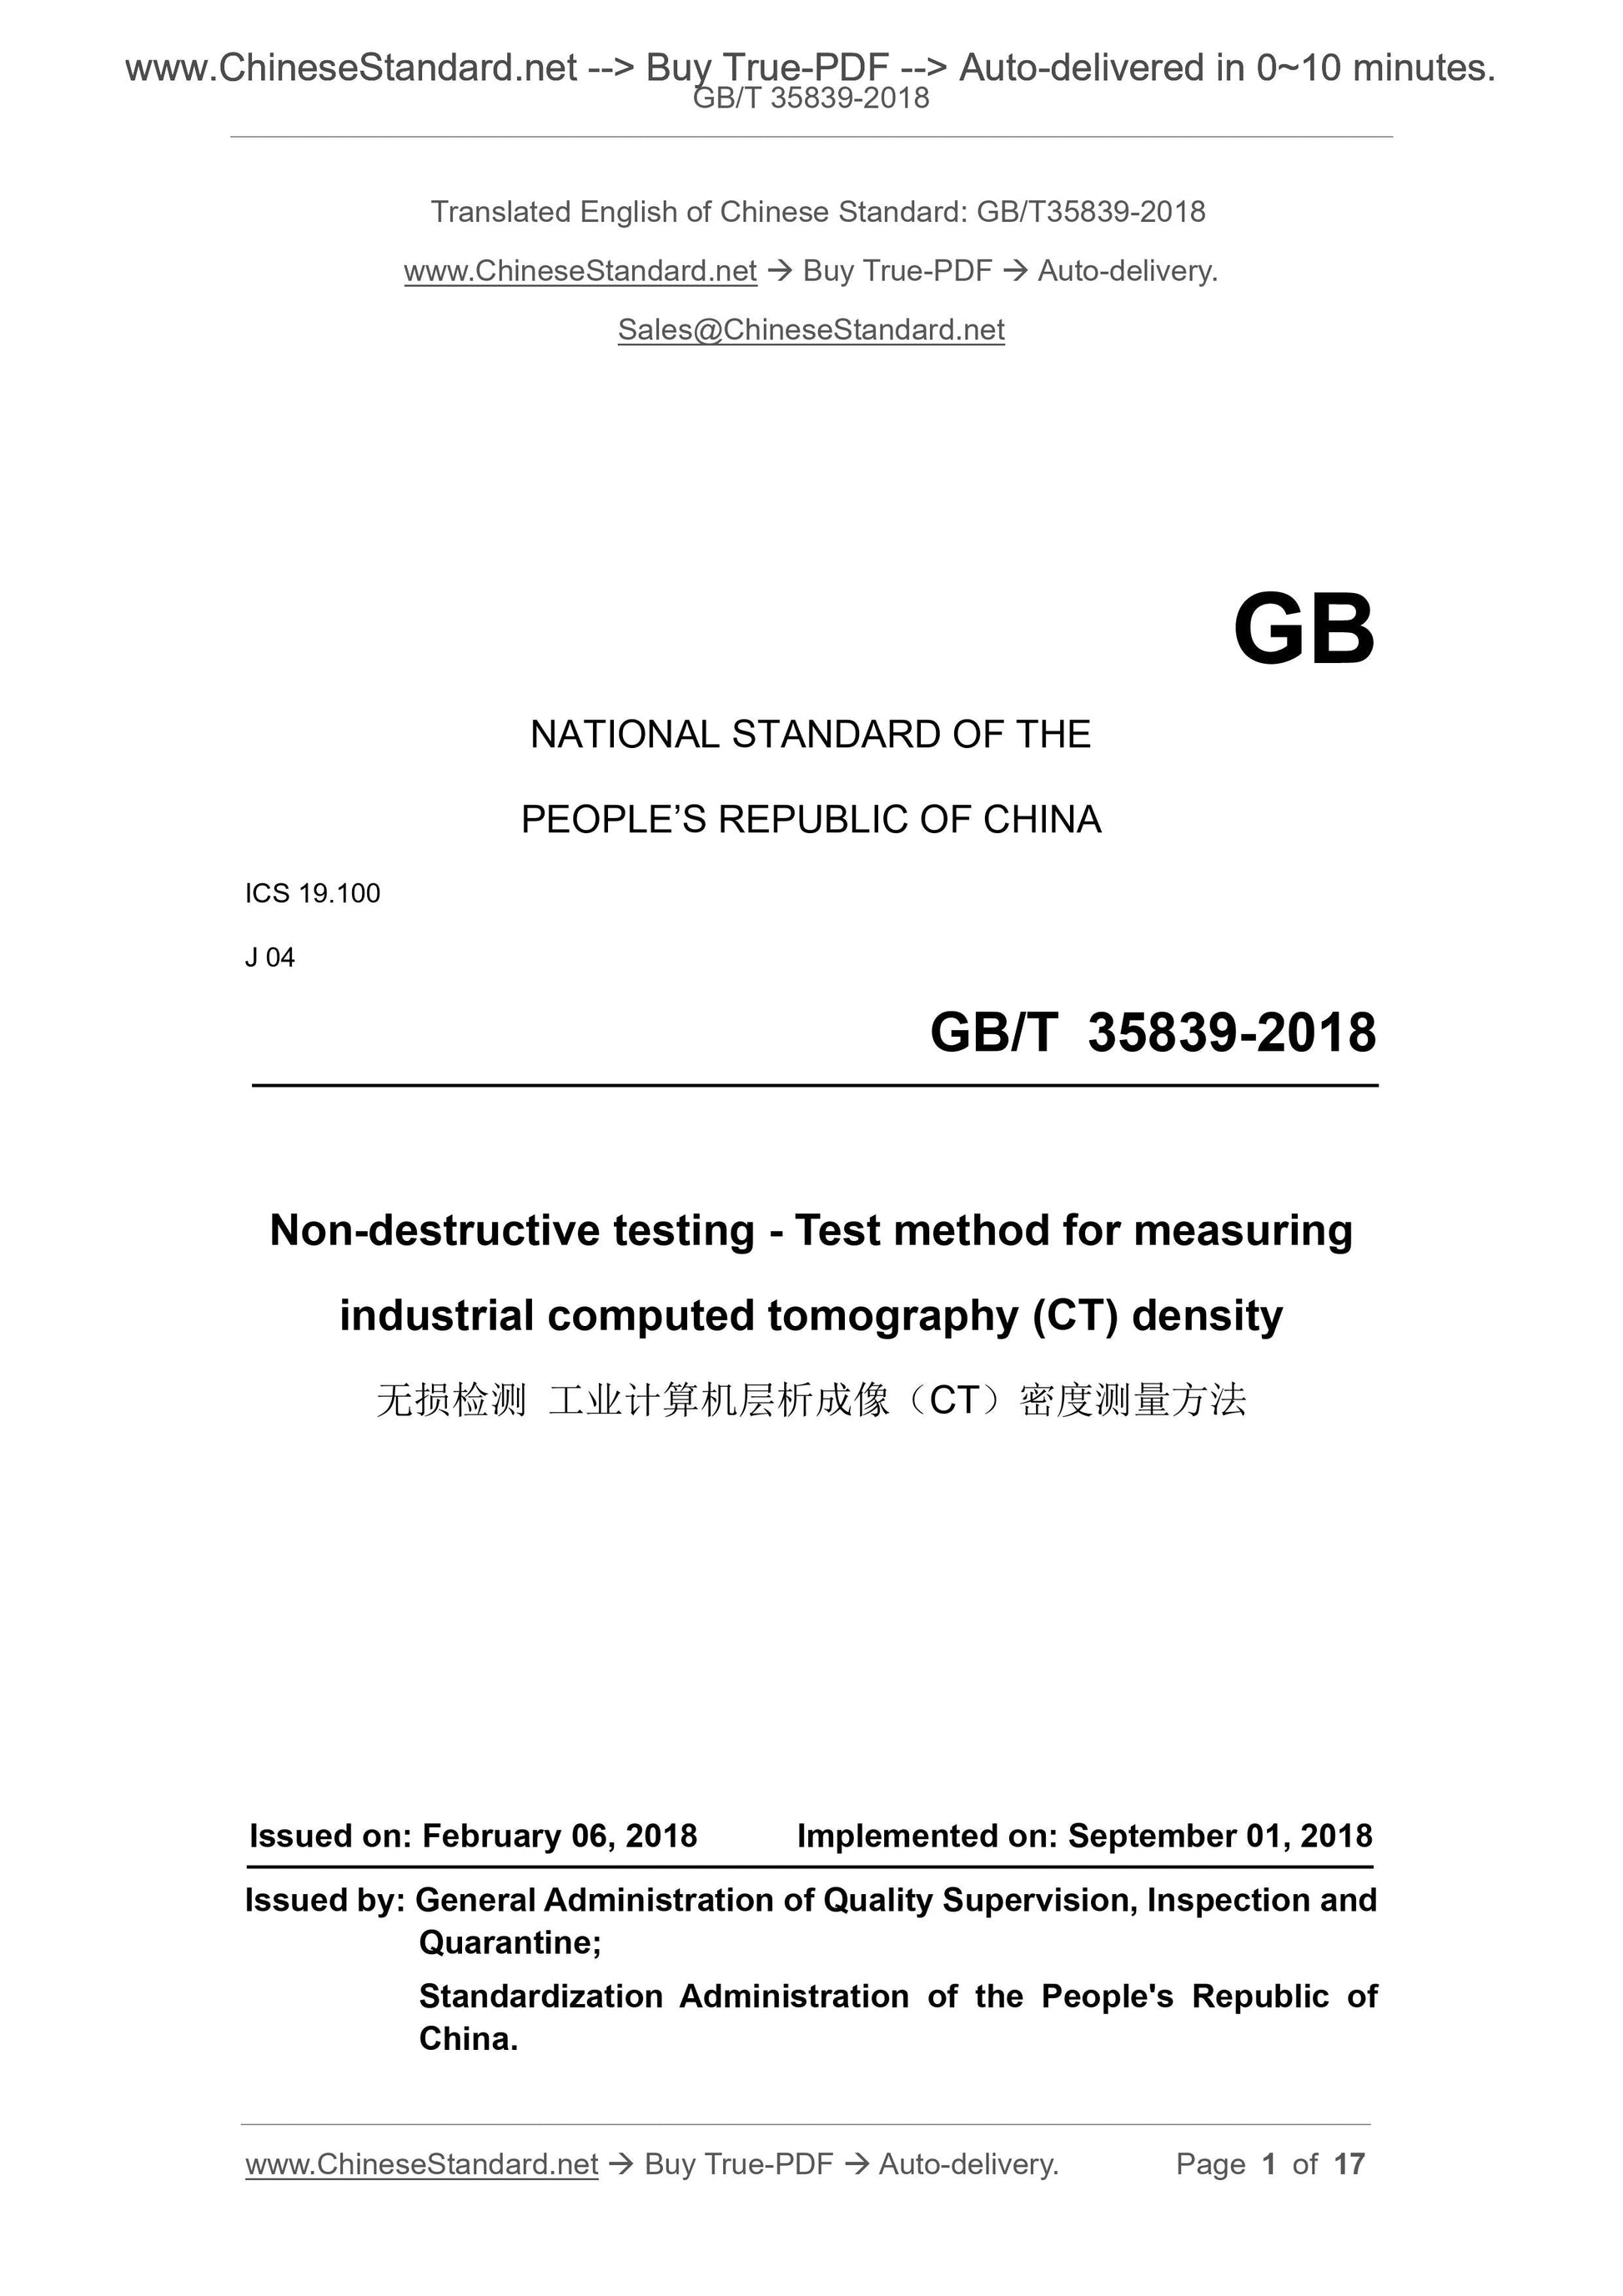 GB/T 35839-2018 Page 1